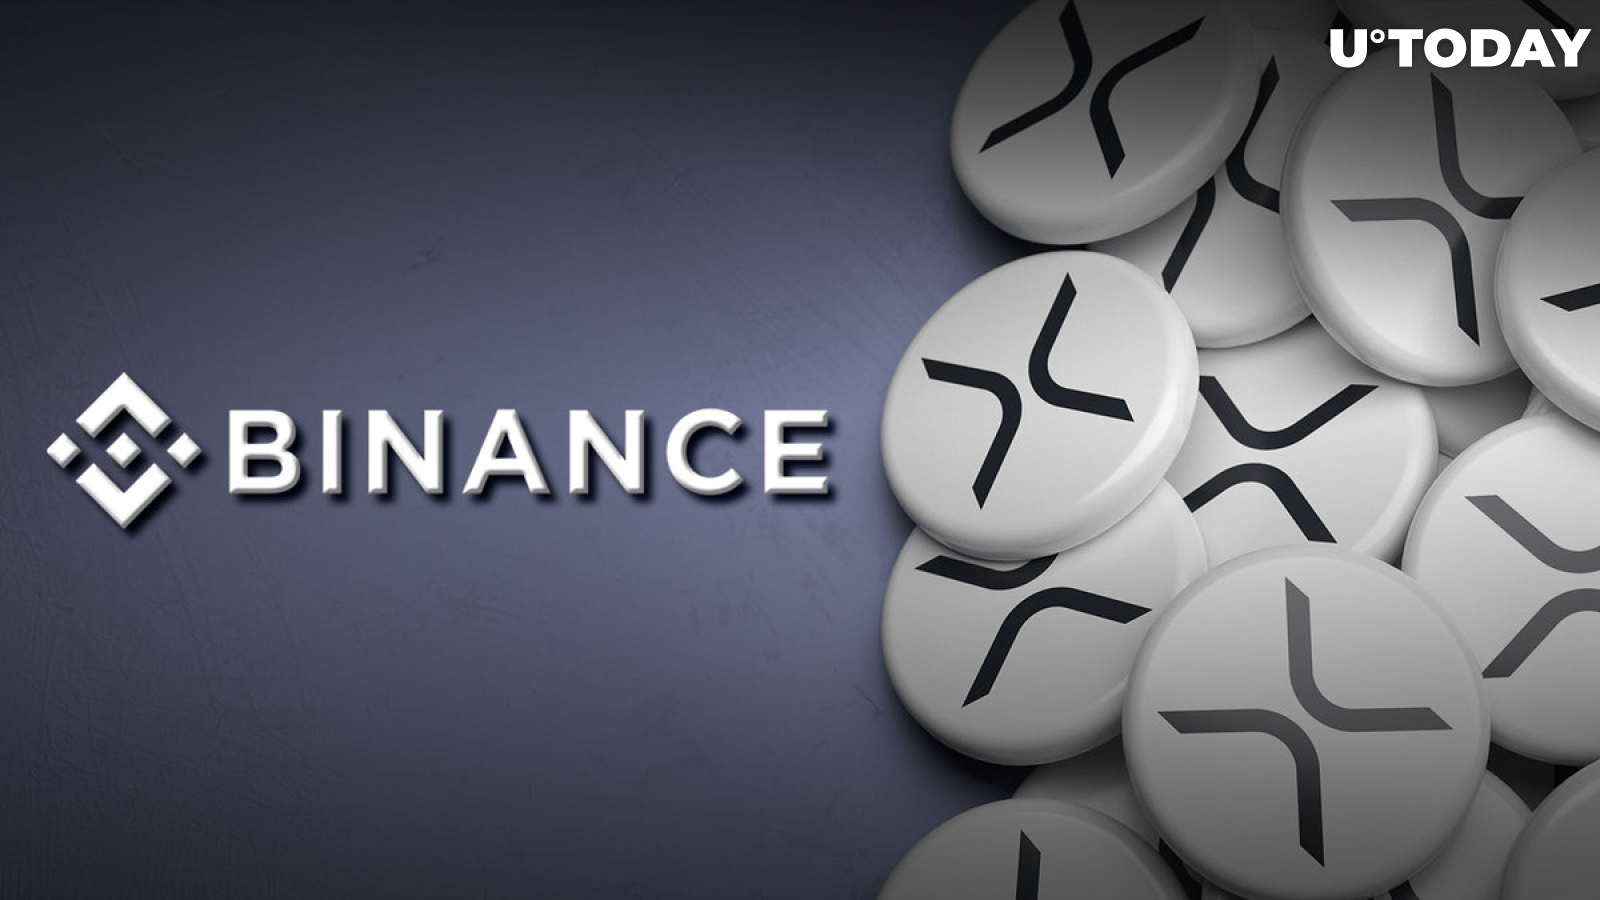 XRP Holders Can Now Earn Rewards on Market Views as Binance Expands Support